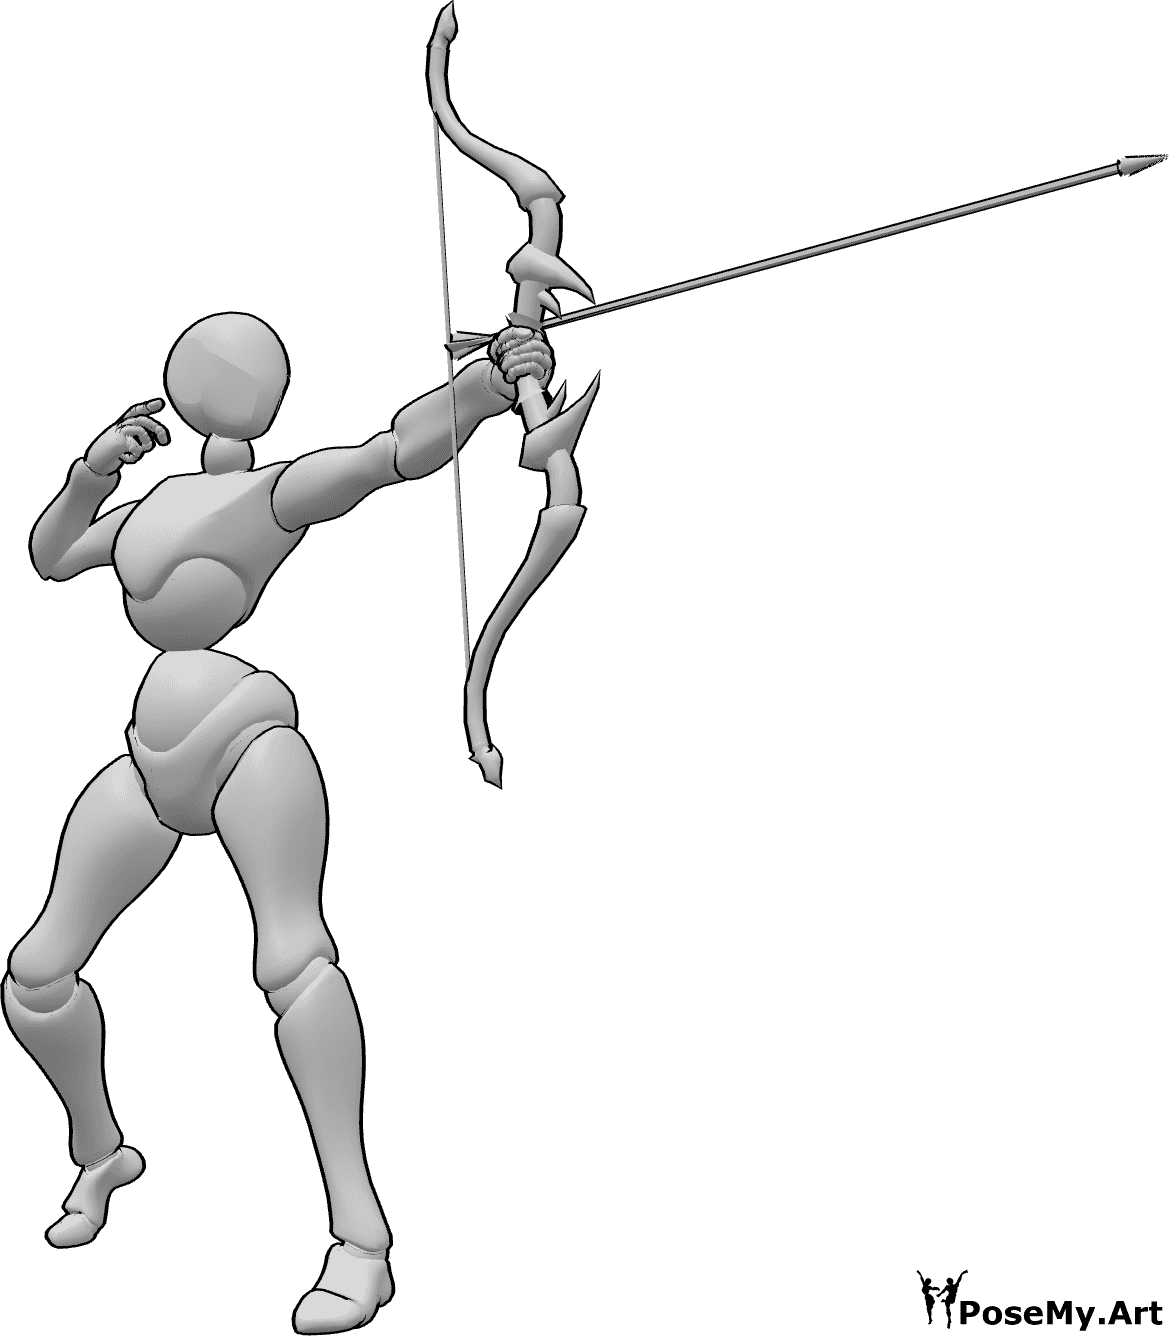 Pose Reference - Female shooting arrow pose - Female is standing and shooting an arrow with her bow in her left hand